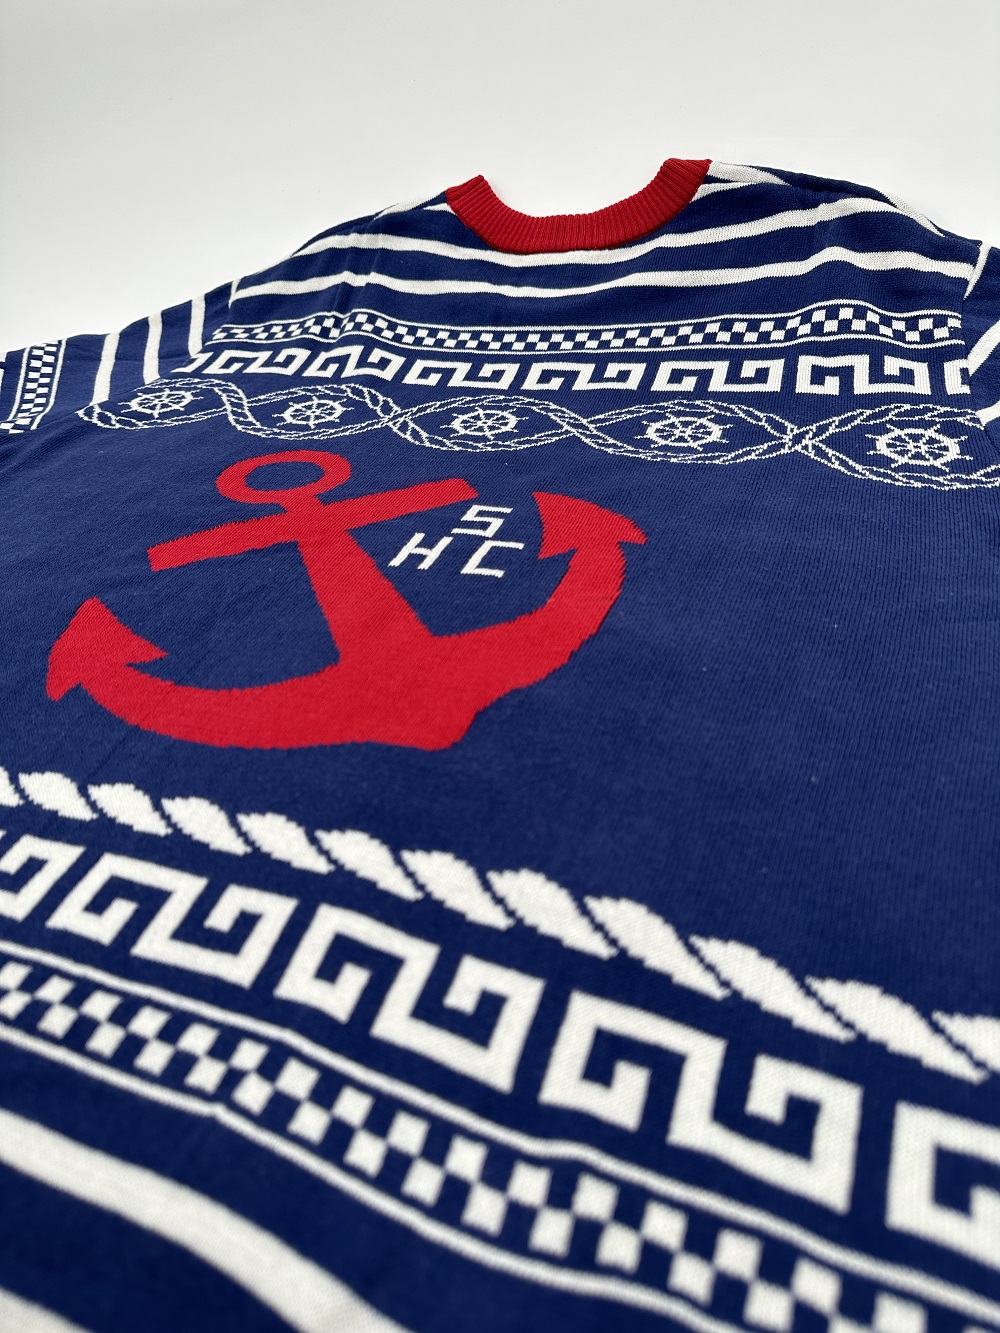 One Piece - Nautical Holiday Sweater - Crunchyroll Exclusive! image count 3